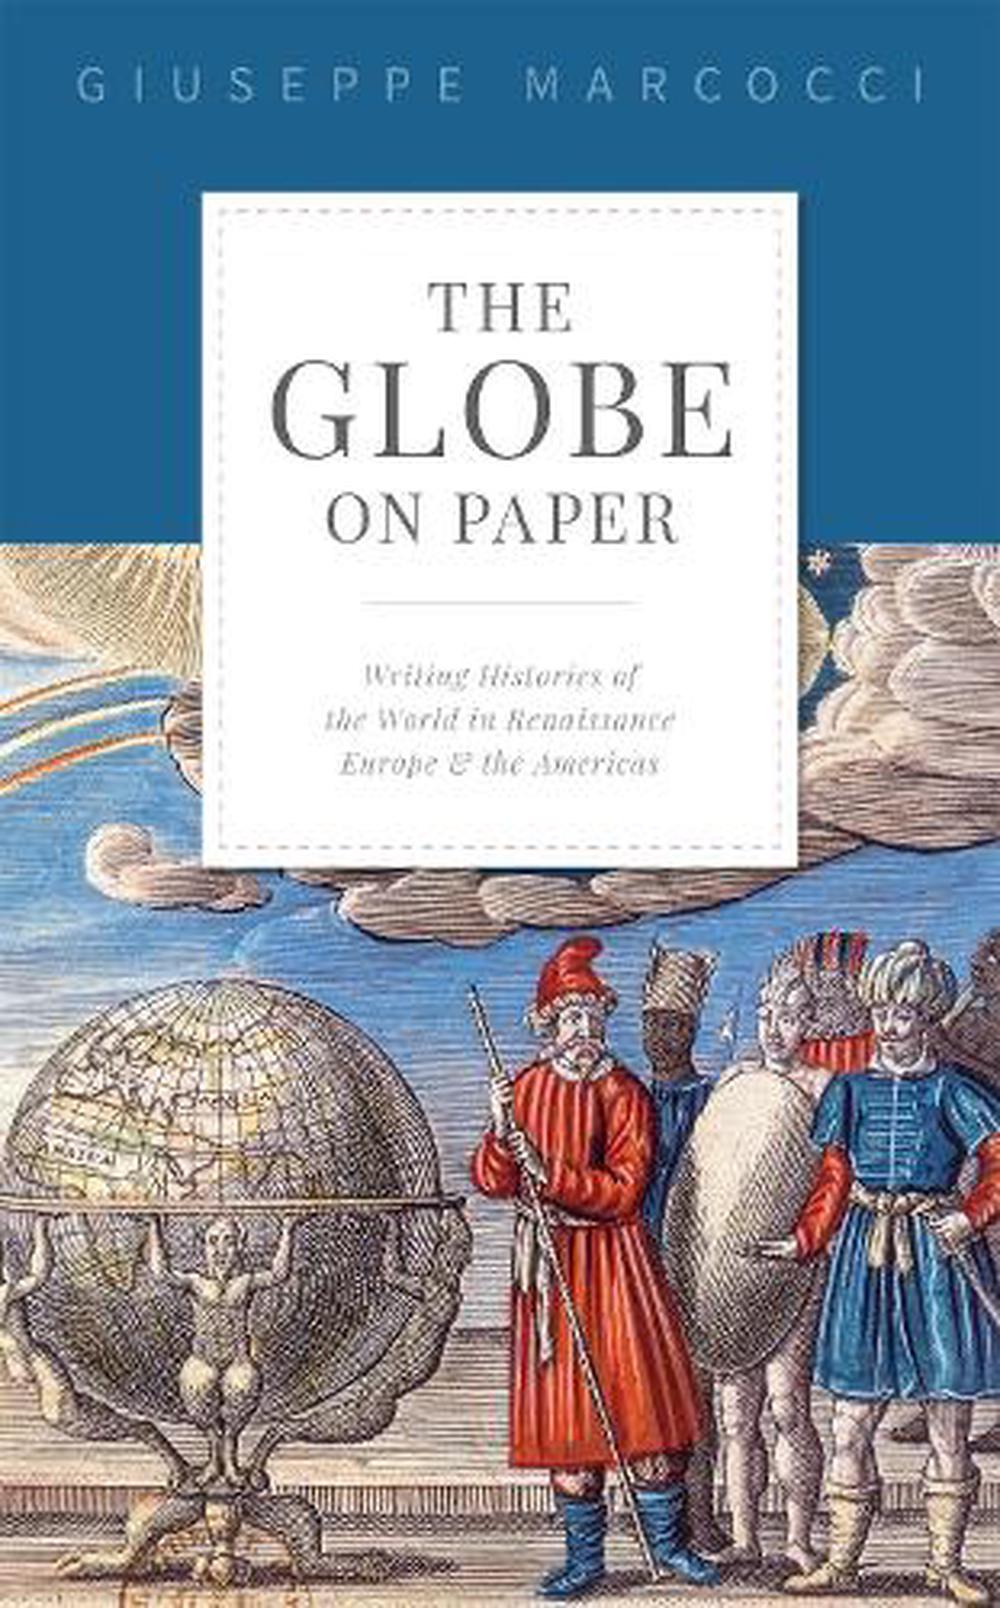 The Globe on Paper by Giuseppe Marcocci